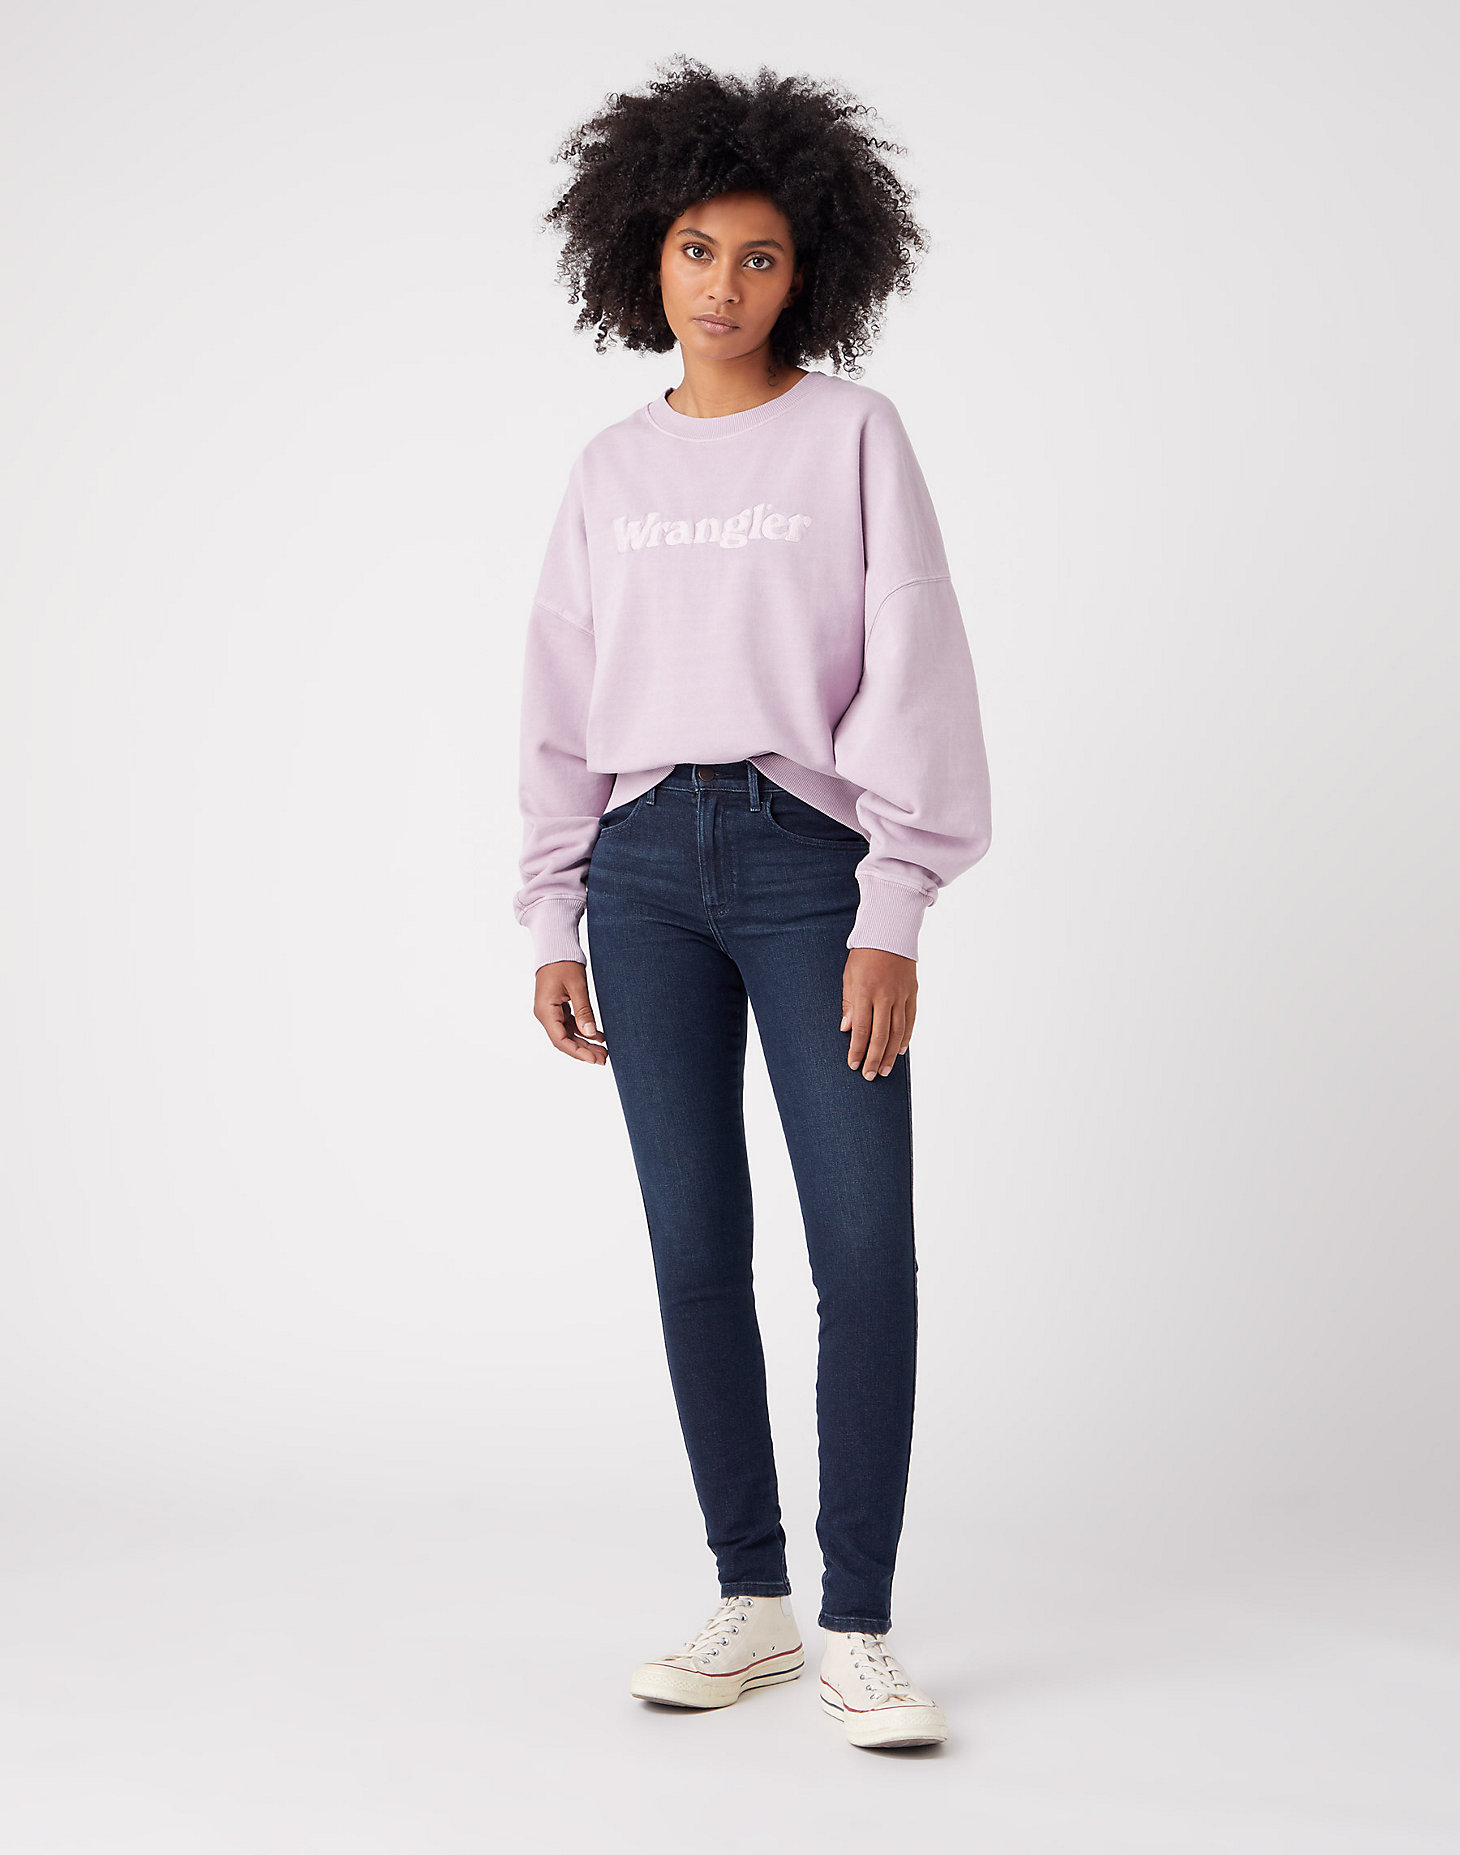 Relaxed Sweatshirt in Natural Violet alternative view 1